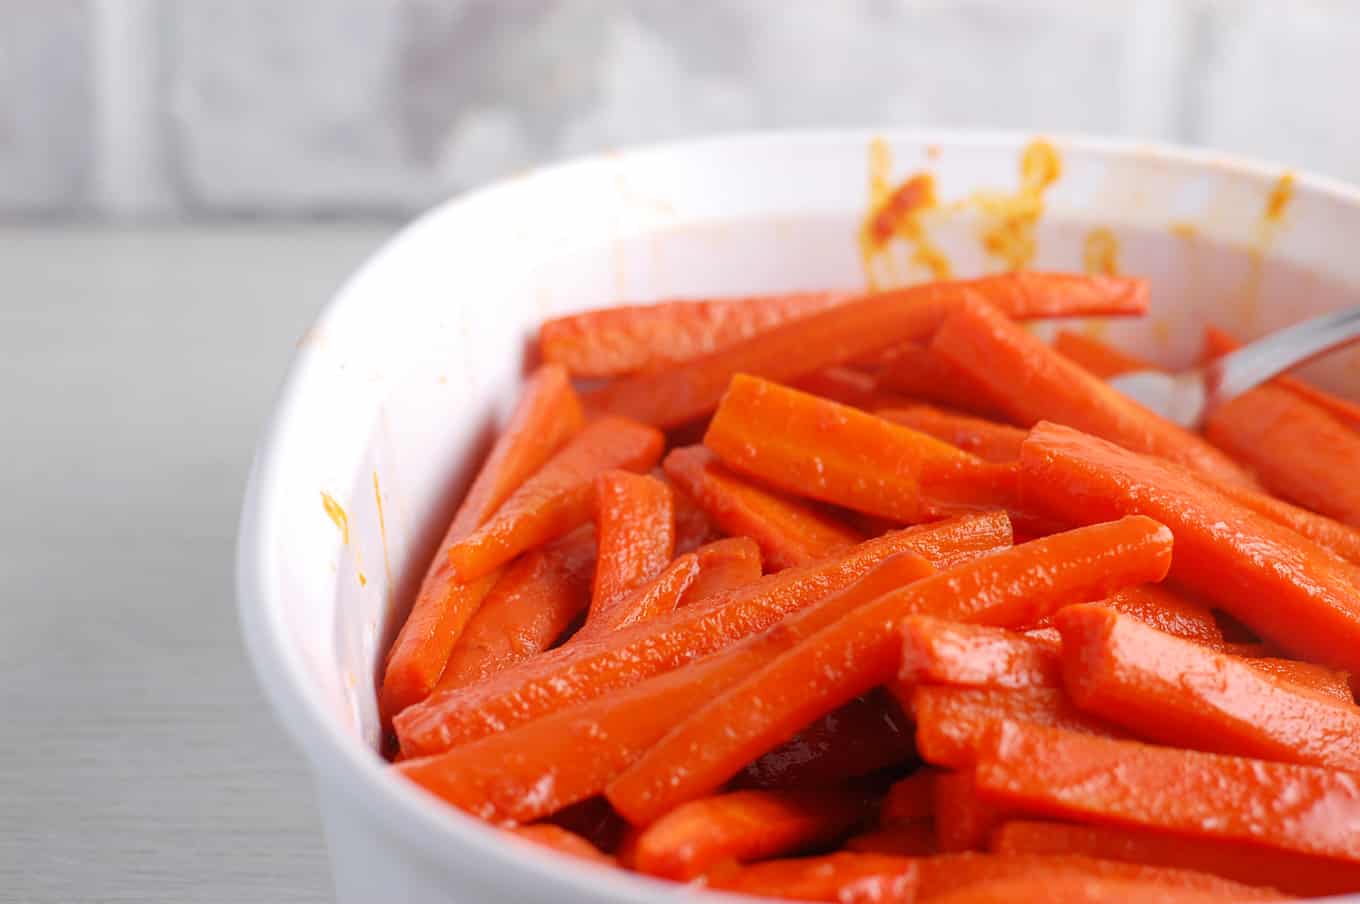 carrots braised in carrot juice in a casserole dish